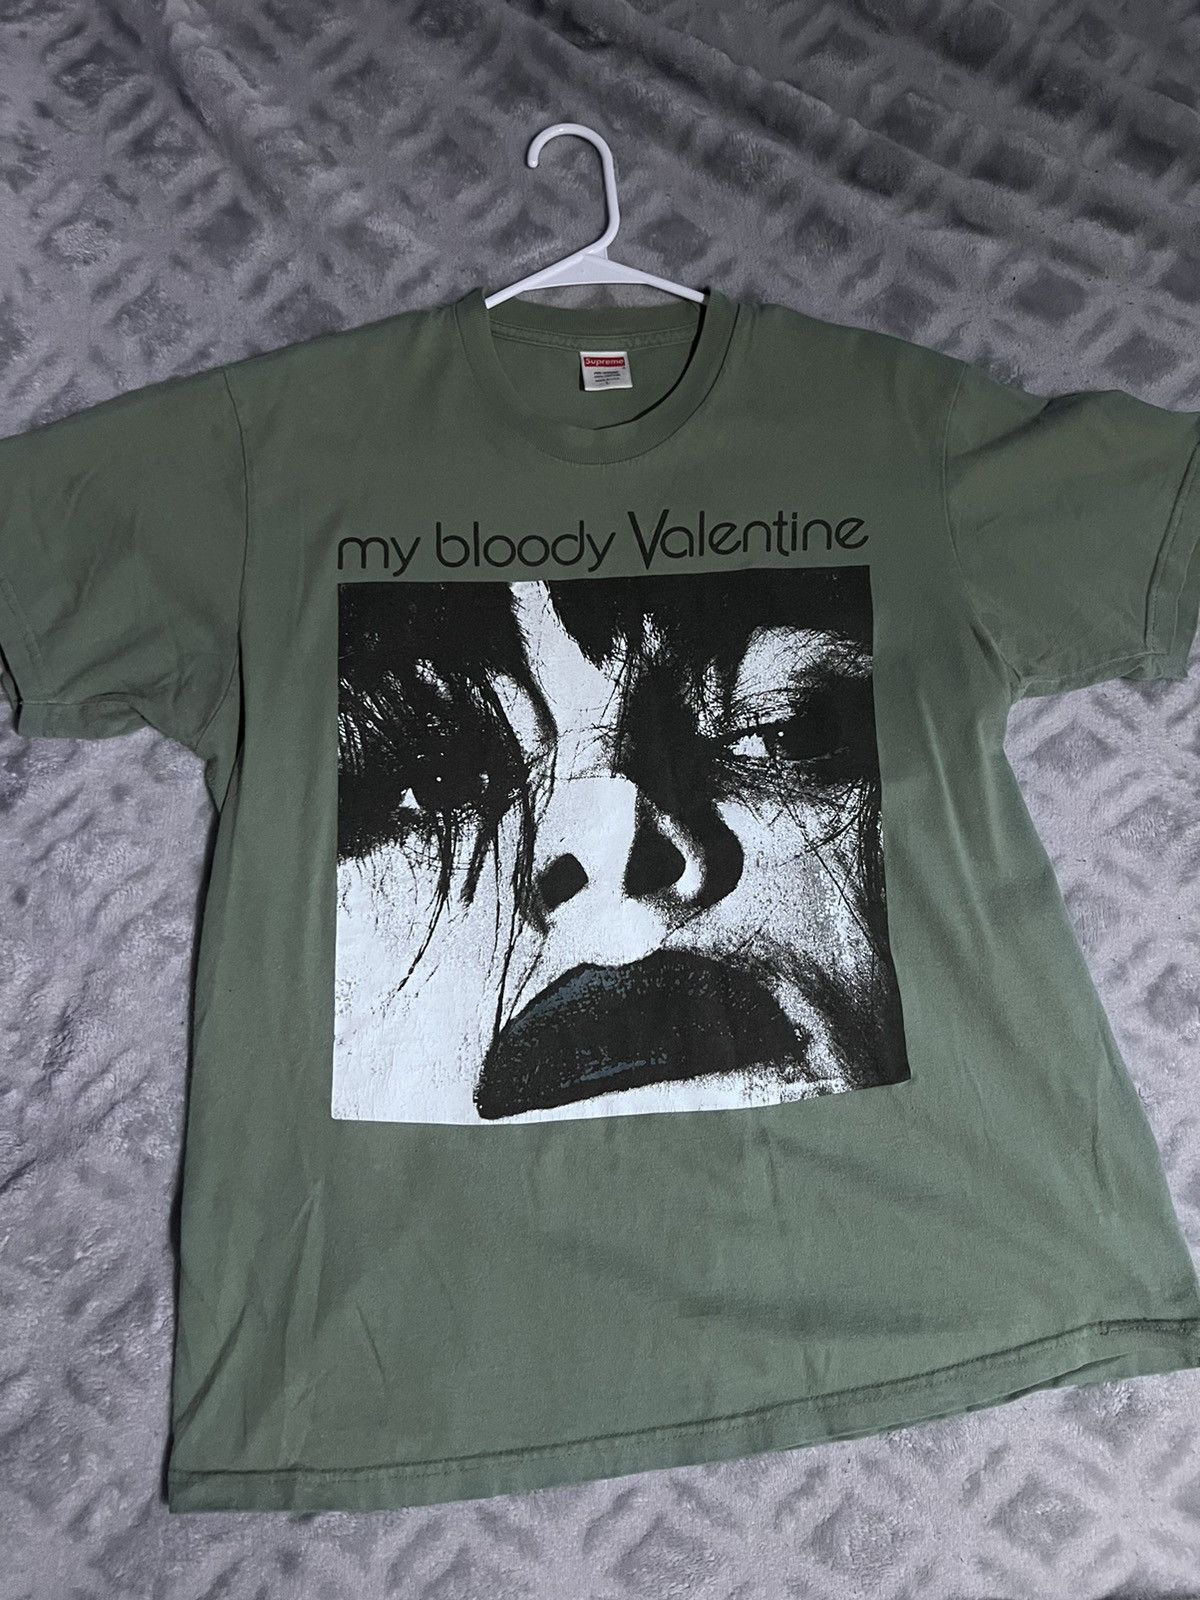 compare stores & low prices Supreme My Bloody Valentine Tee | www ...